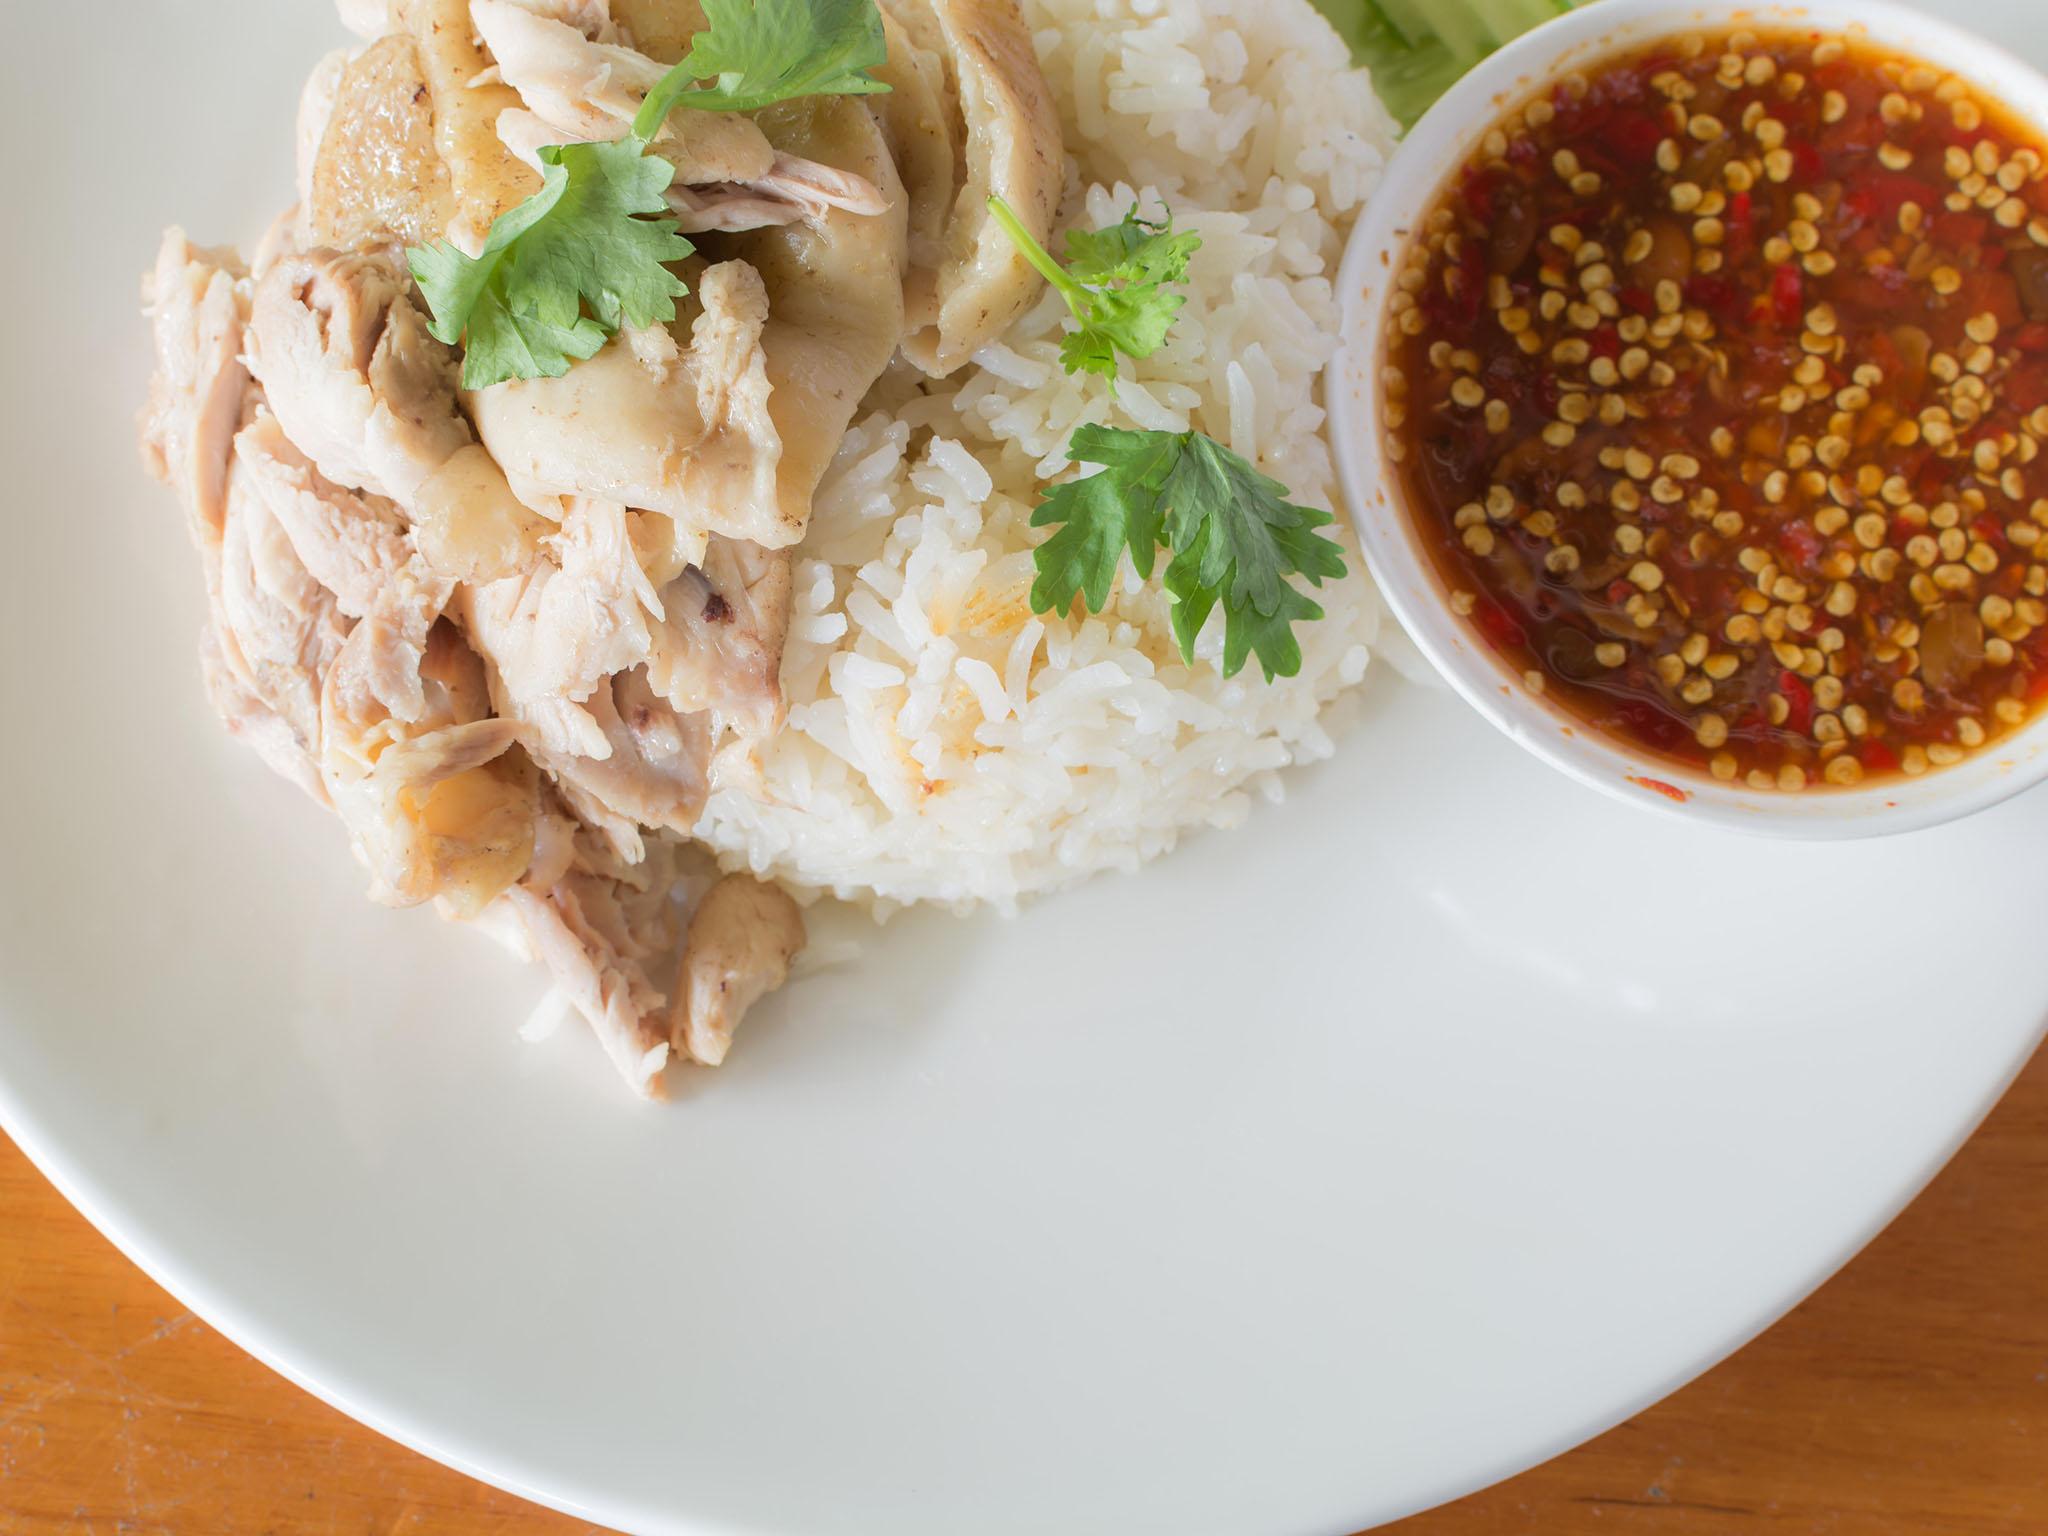 Comfort food is often reminiscent of childhood, such as Jenny Linford’s Hainanese chicken rice, which she ate growing up in Singapore